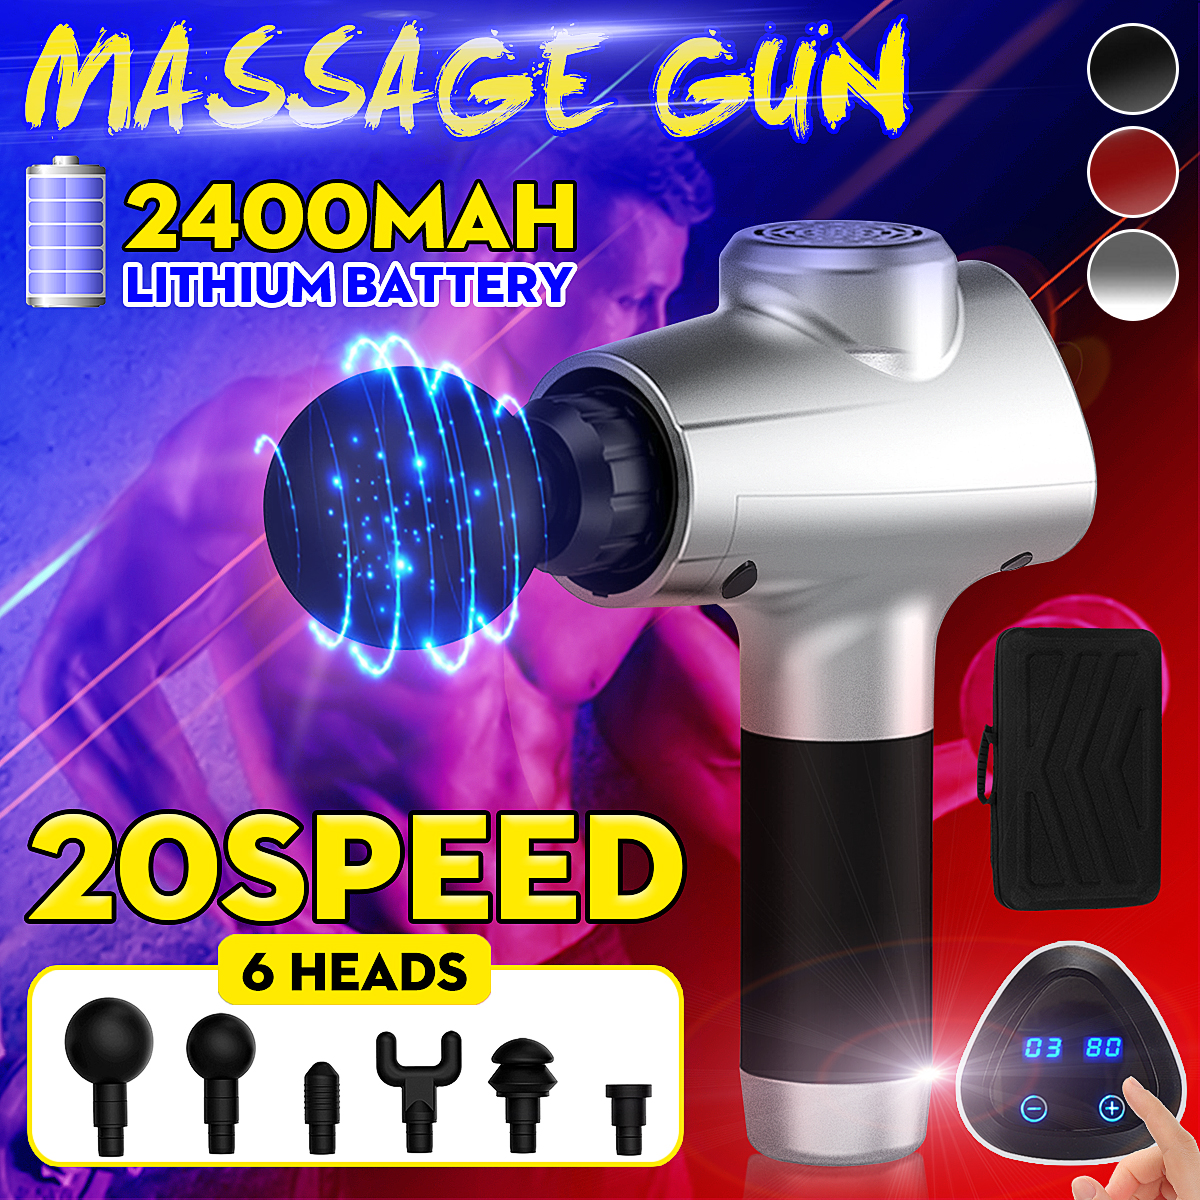 20-Speed-24V-2400mAh-Electric-Percussion-Massager-G-un-LCD-Muscle-Vibration-Relaxing-Therapy-Device-1574090-2